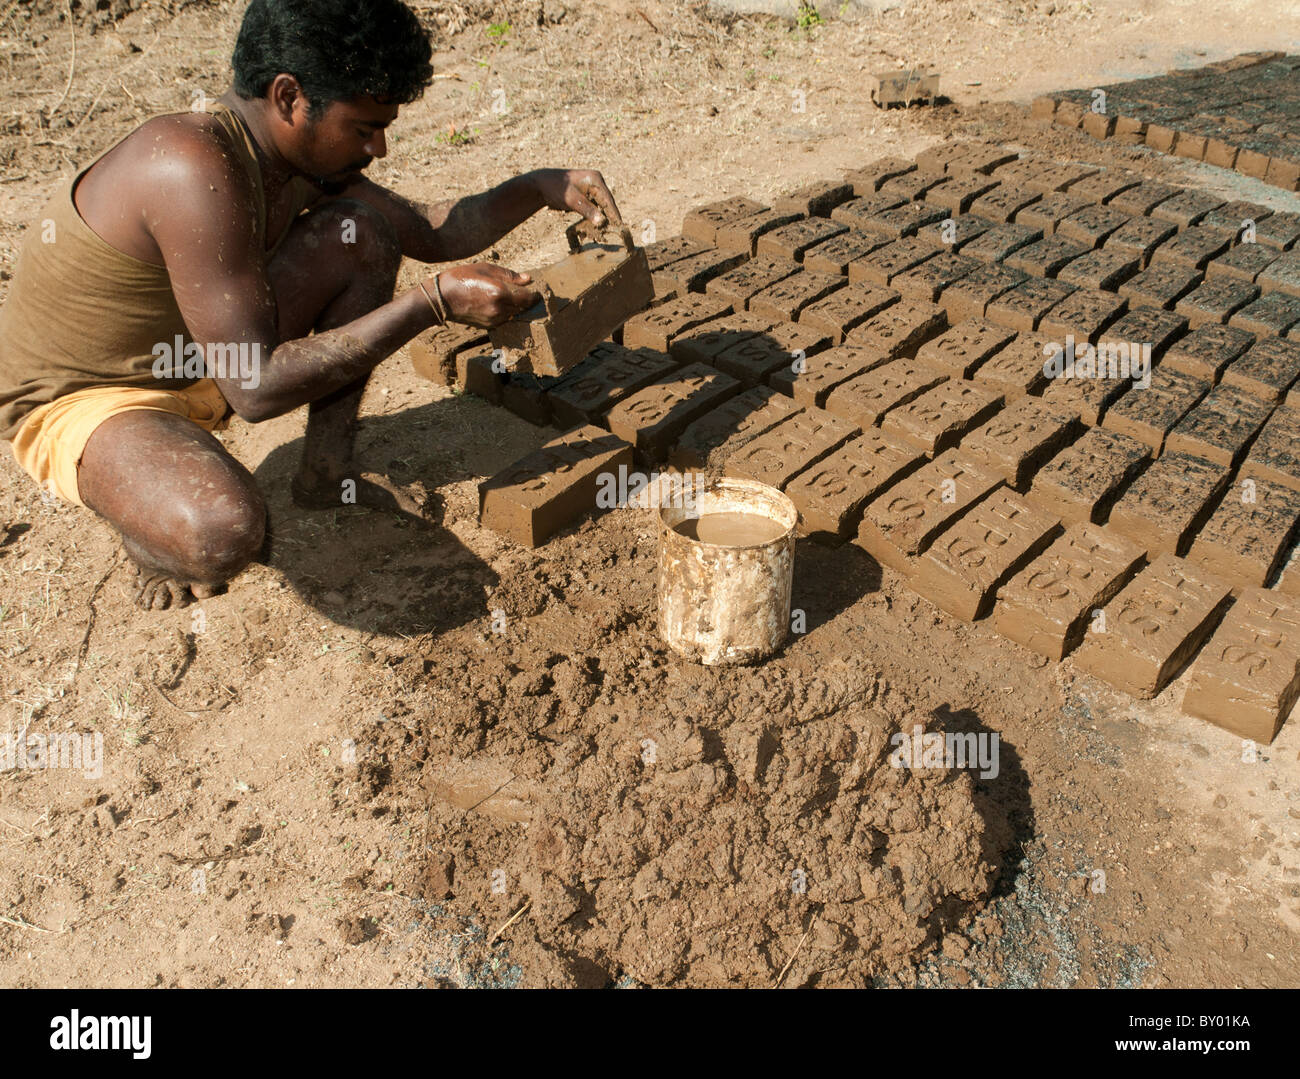 A man making bricks by hand that are then dried in the sun In India Stock Photo